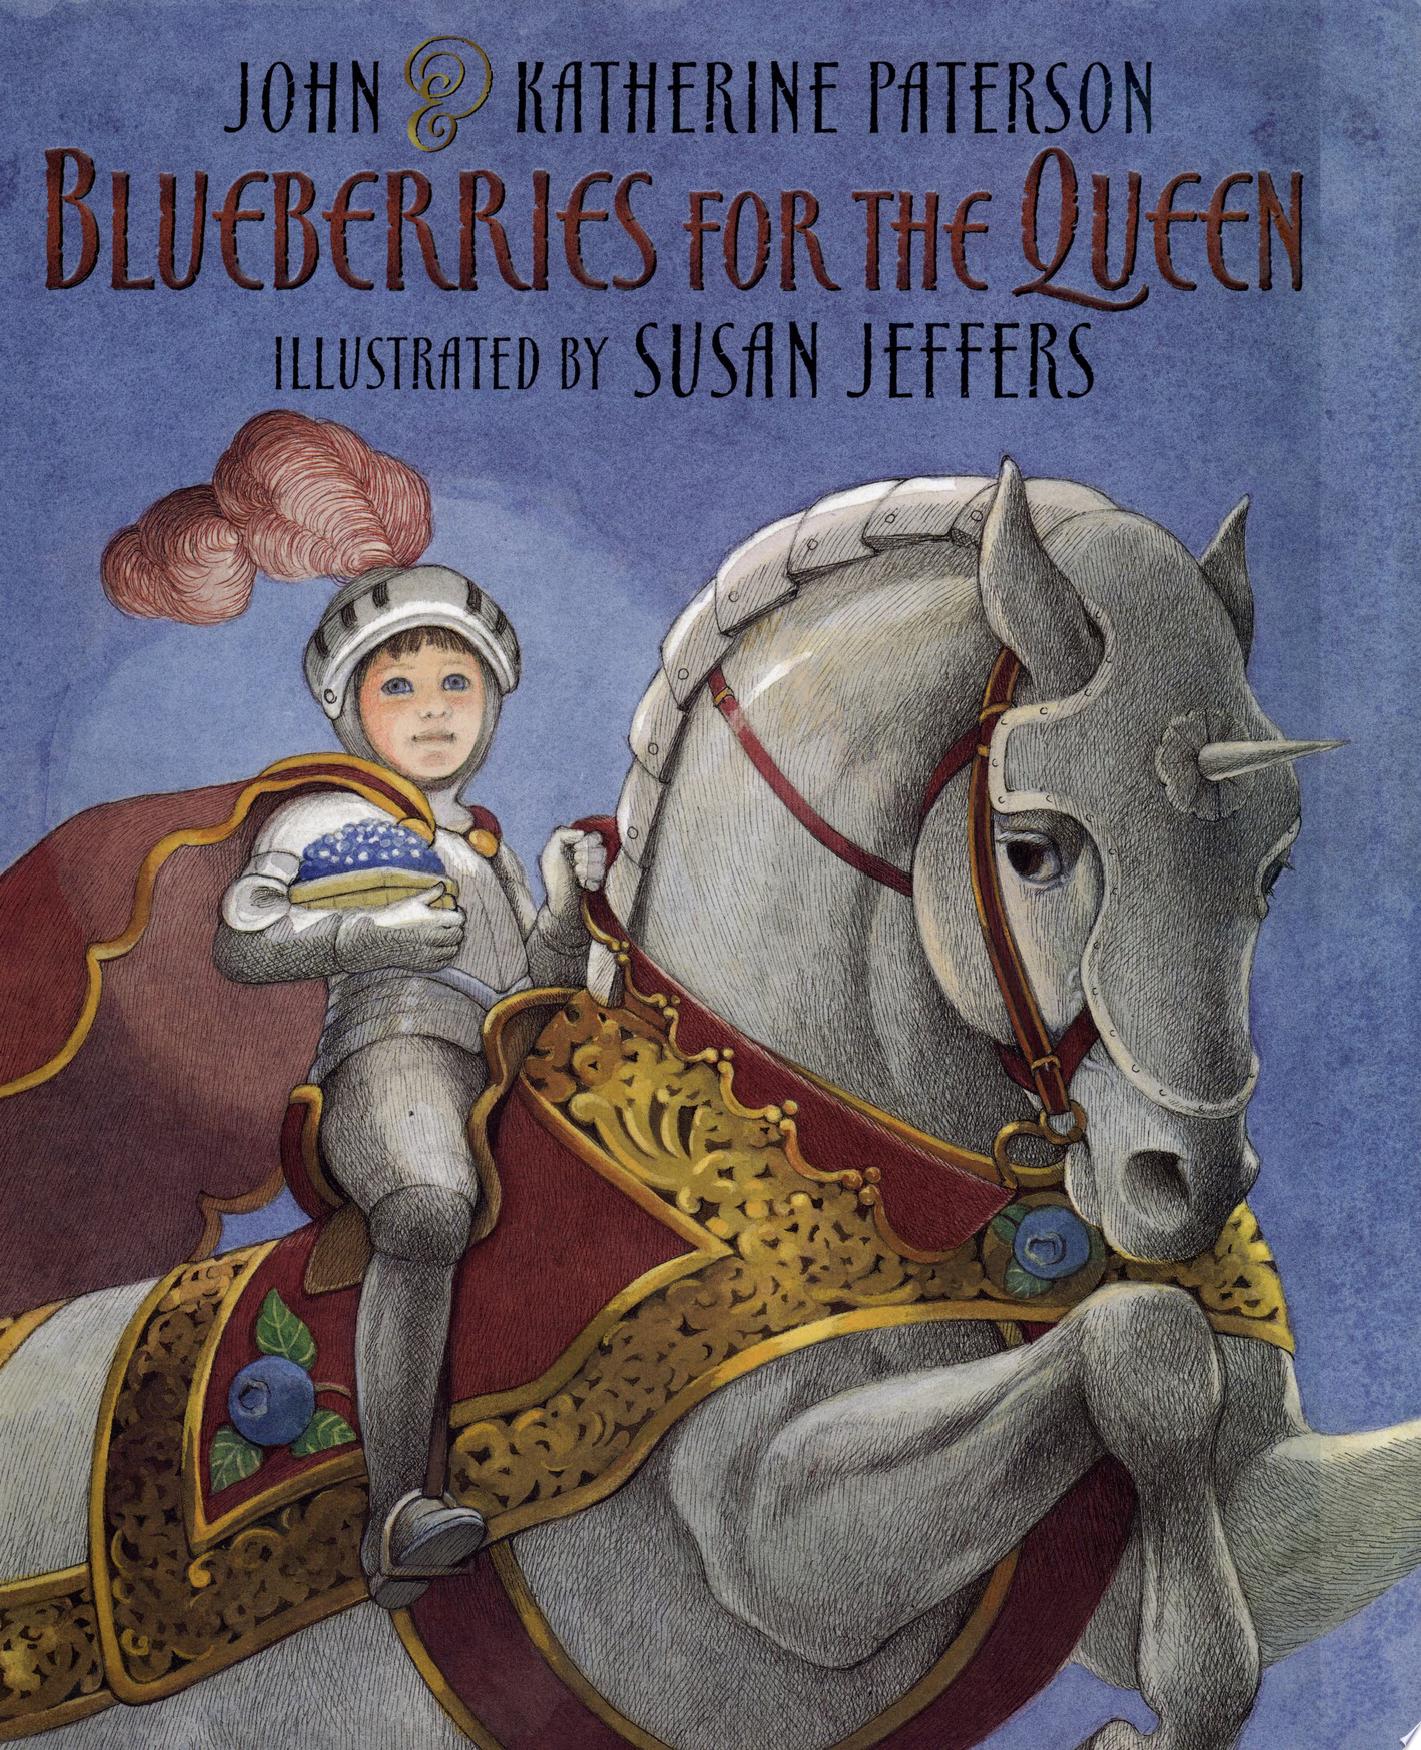 Image for "Blueberries for the Queen"